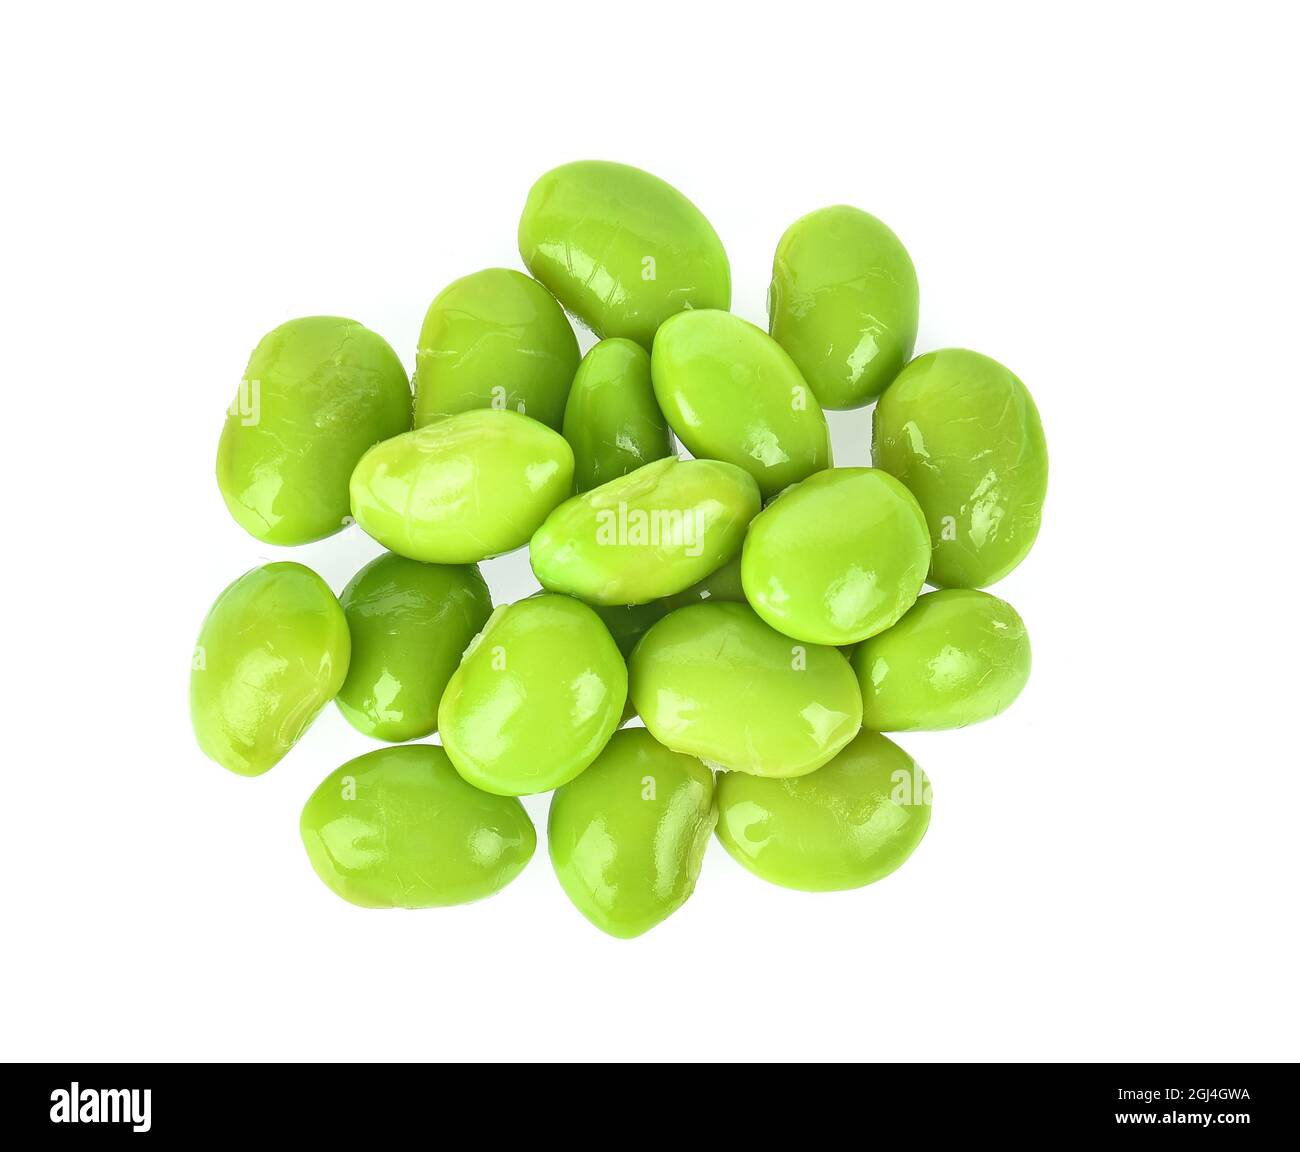 Top view of  green soybeans on white background Stock Photo